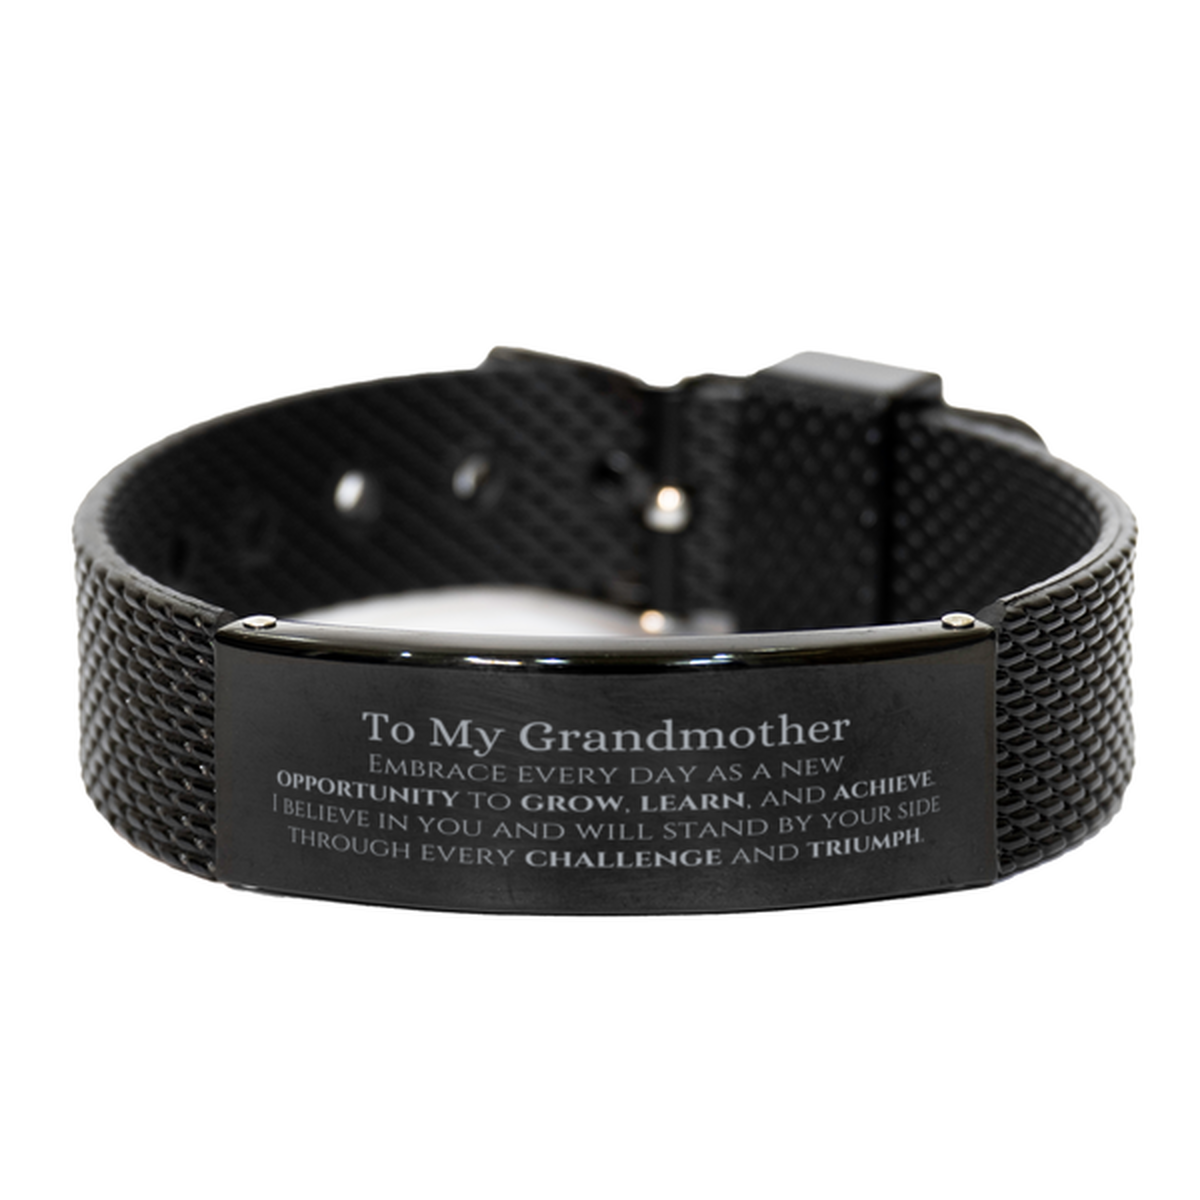 To My Grandmother Gifts, I believe in you and will stand by your side, Inspirational Black Shark Mesh Bracelet For Grandmother, Birthday Christmas Motivational Grandmother Gifts